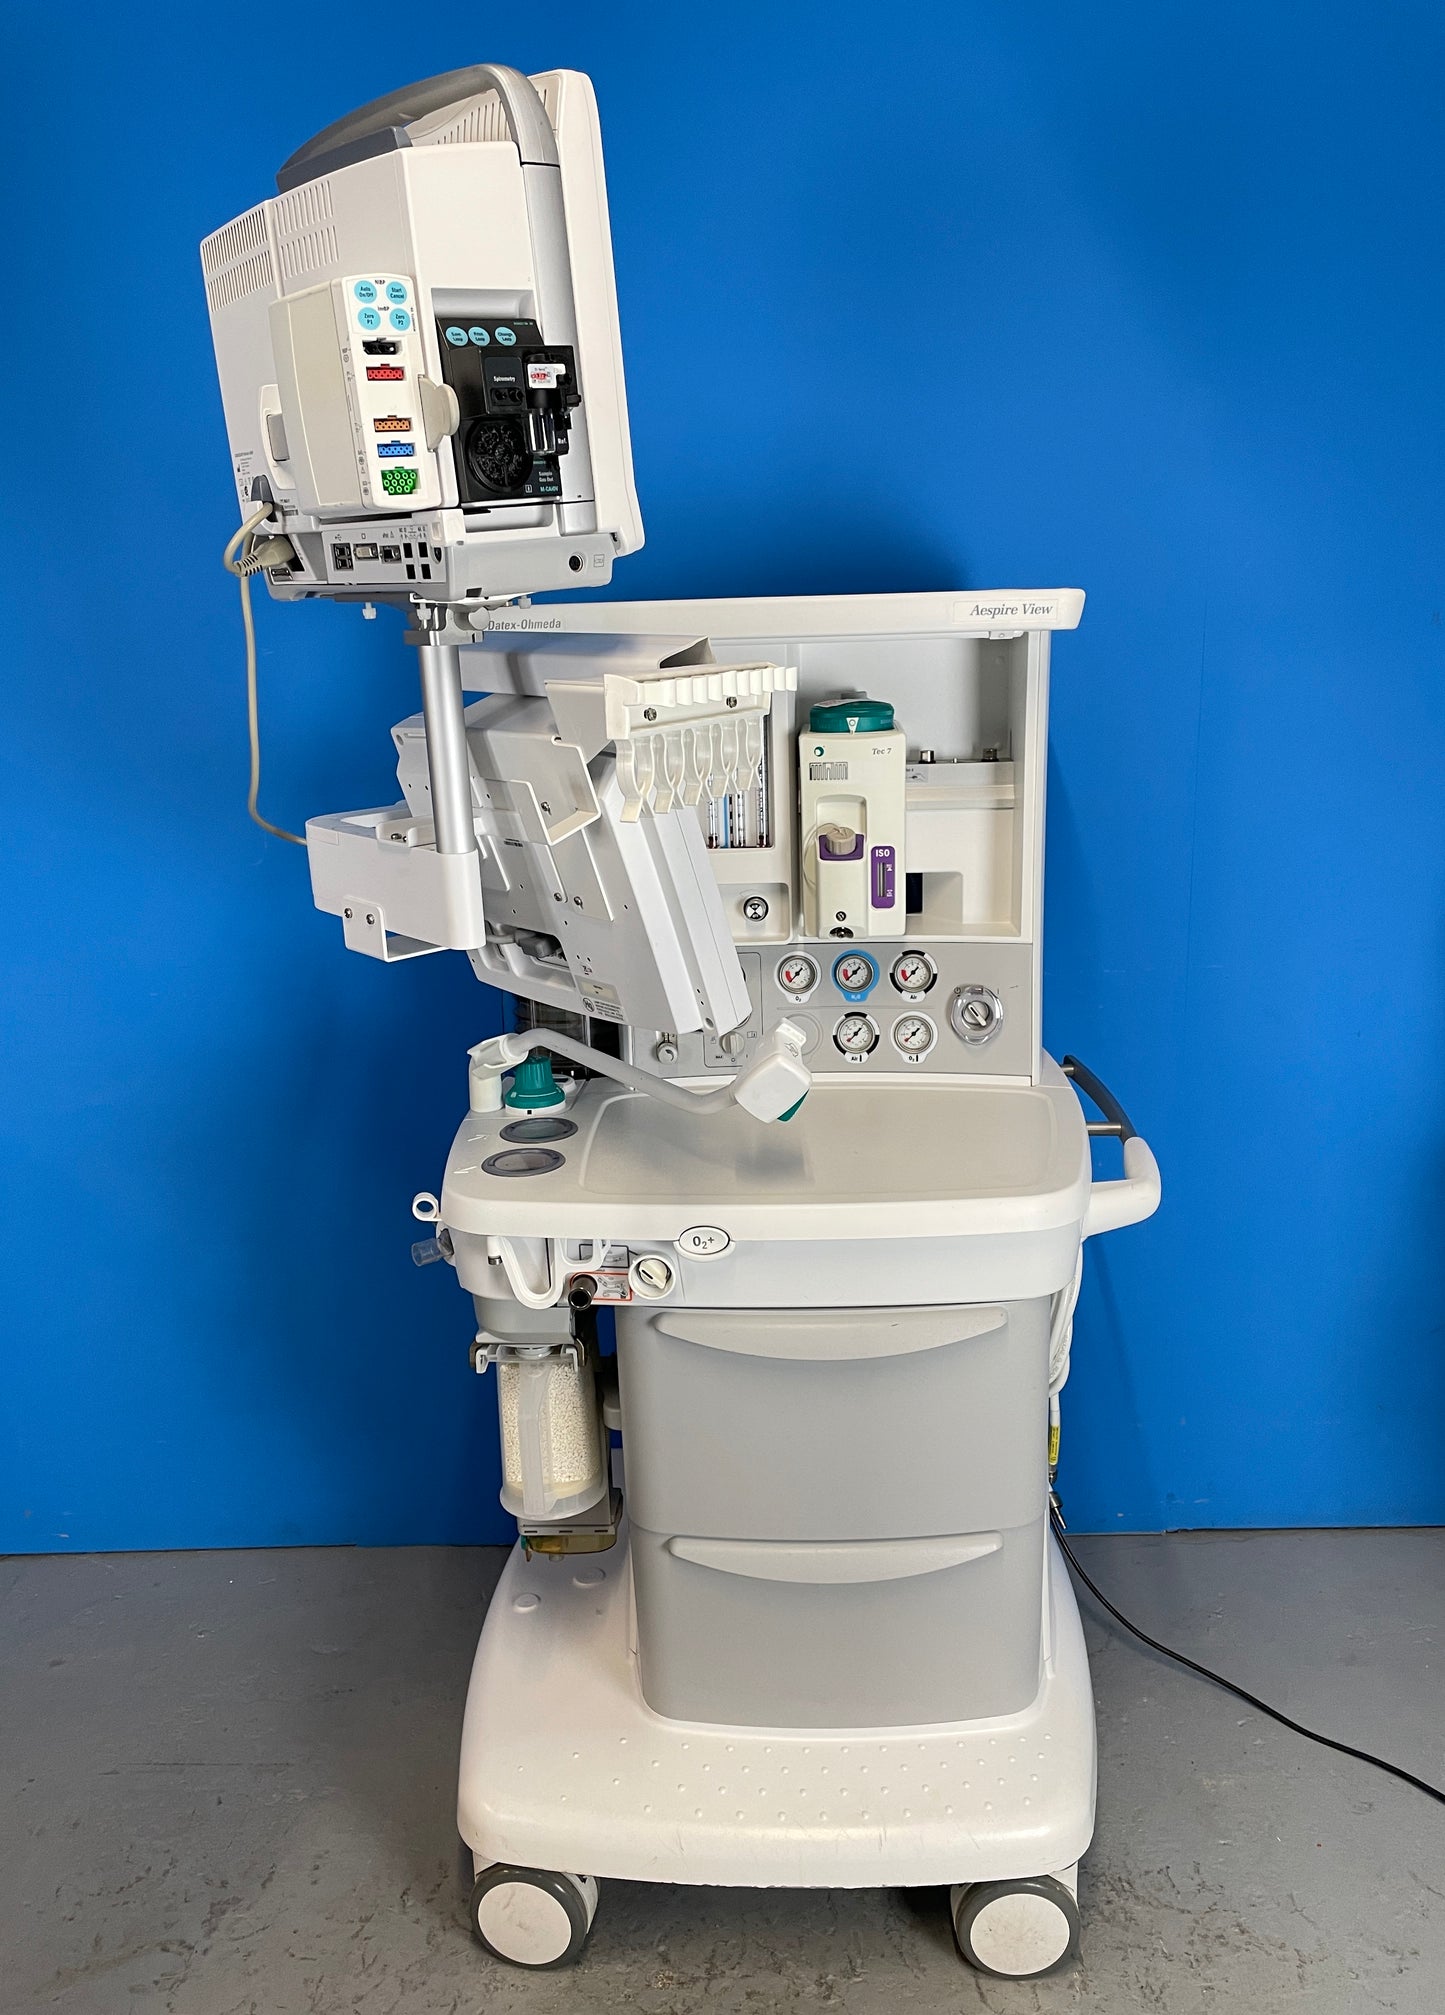 Aespire View offers a large, 12-inch color ventilator display and features GE’s Advanced Breathing System (ABS), which is well-suited for low flow anesthesia